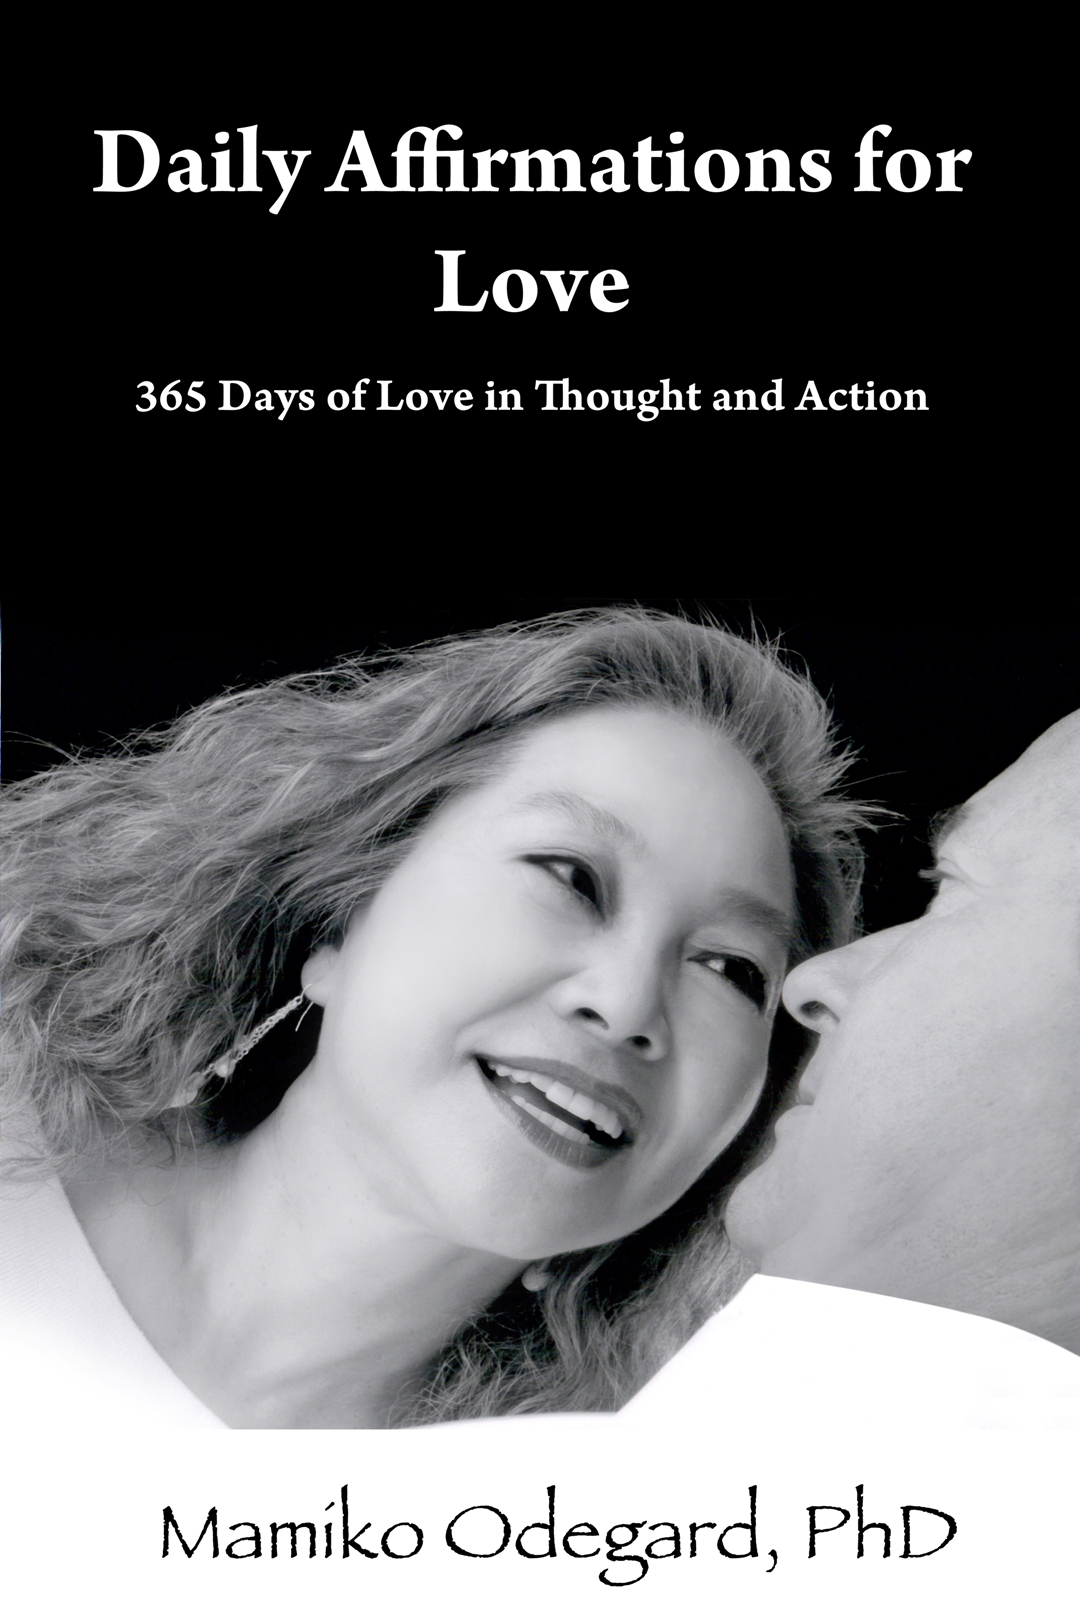 Daily Affirmations For Love: 365 Days of Love in Thought and Action